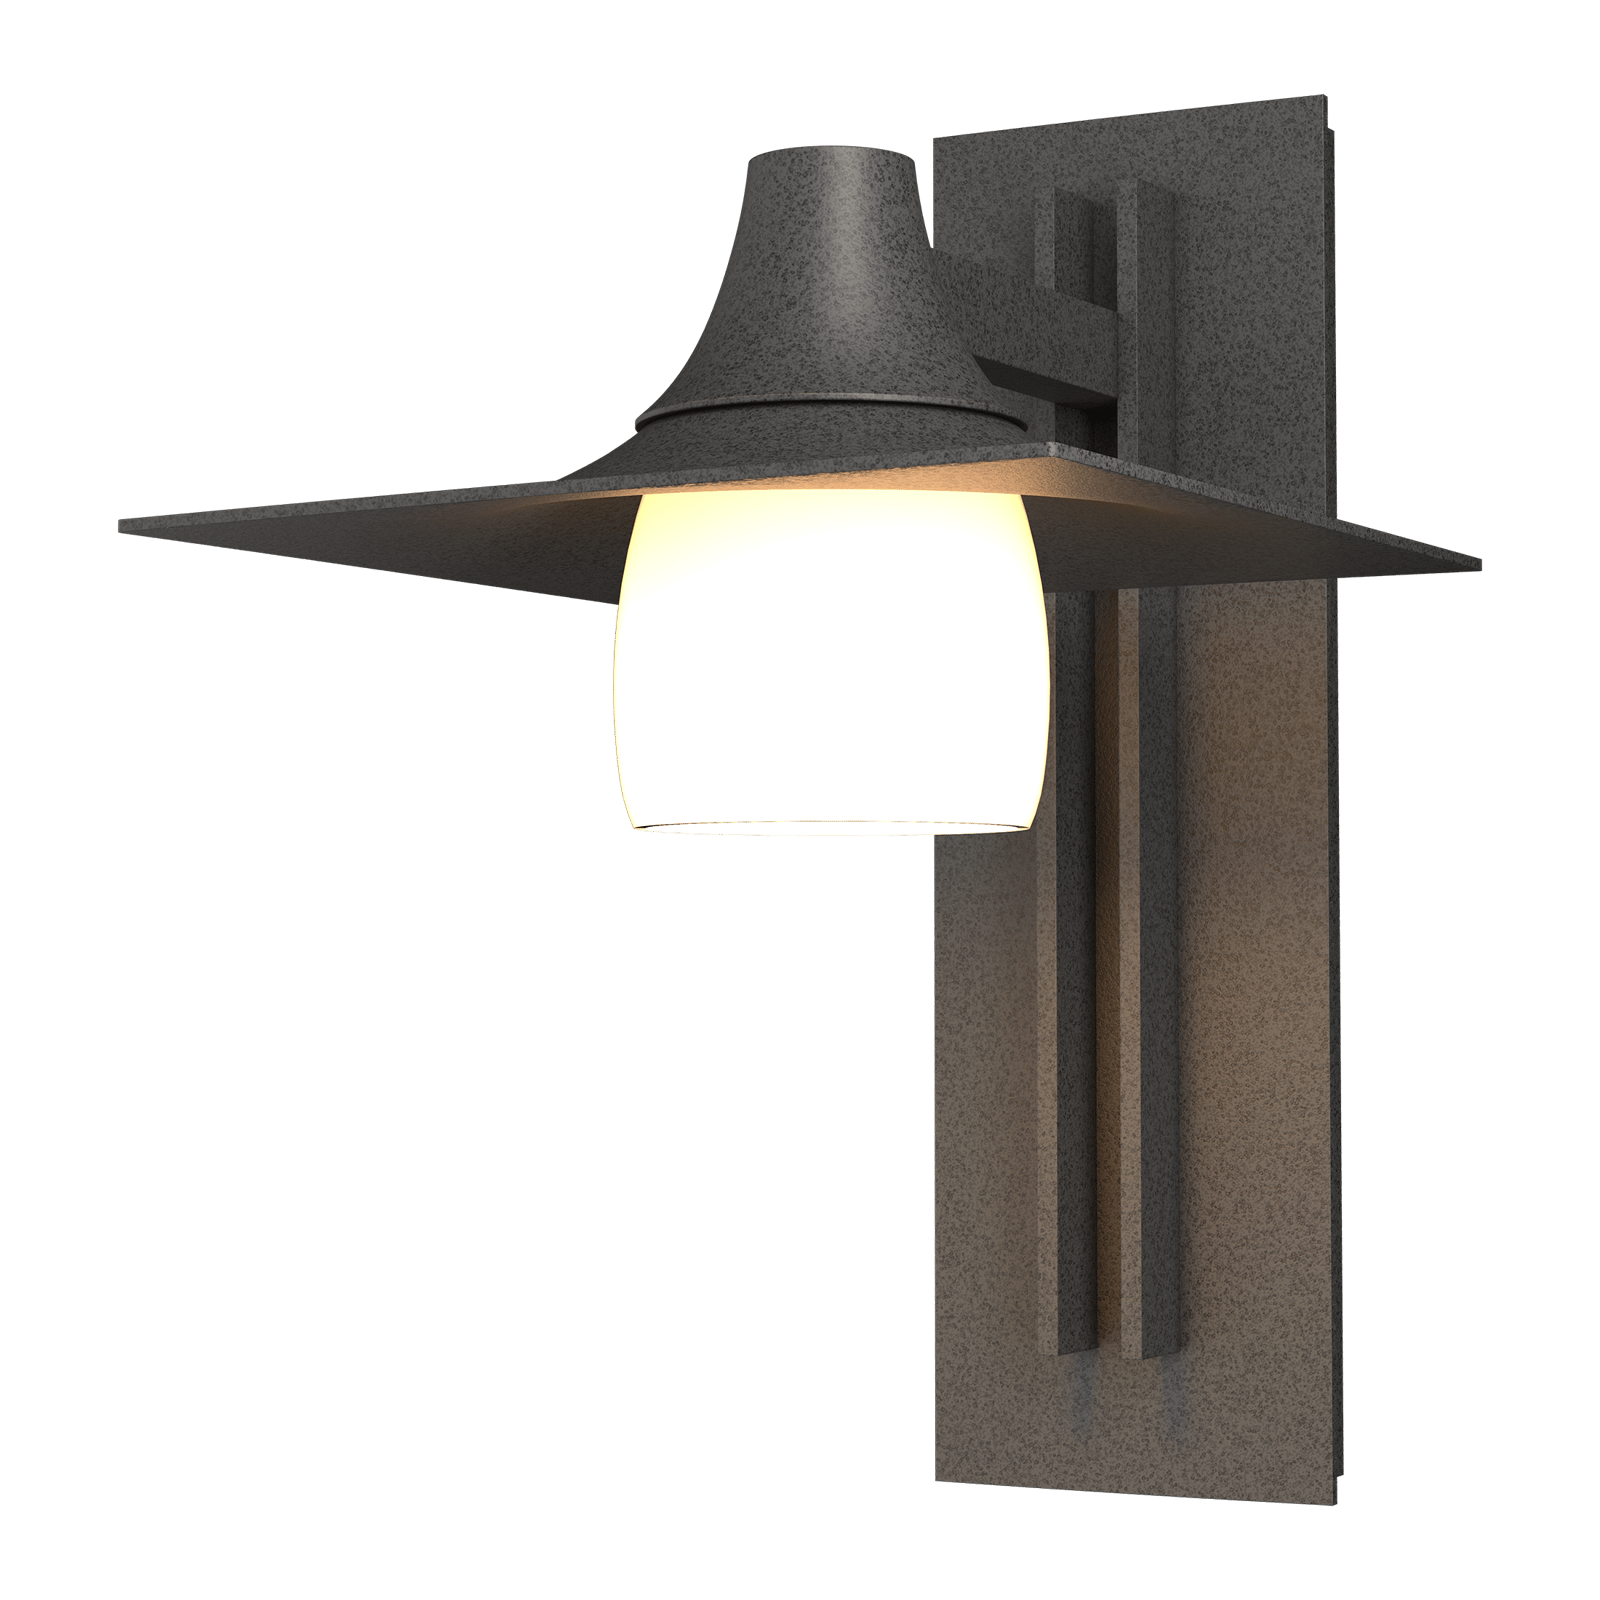 Hubbardton Forge Hood Large Outdoor Sconce Outdoor l Wall Hubbardton Forge Coastal Natural Iron Opal Glass (GG) 